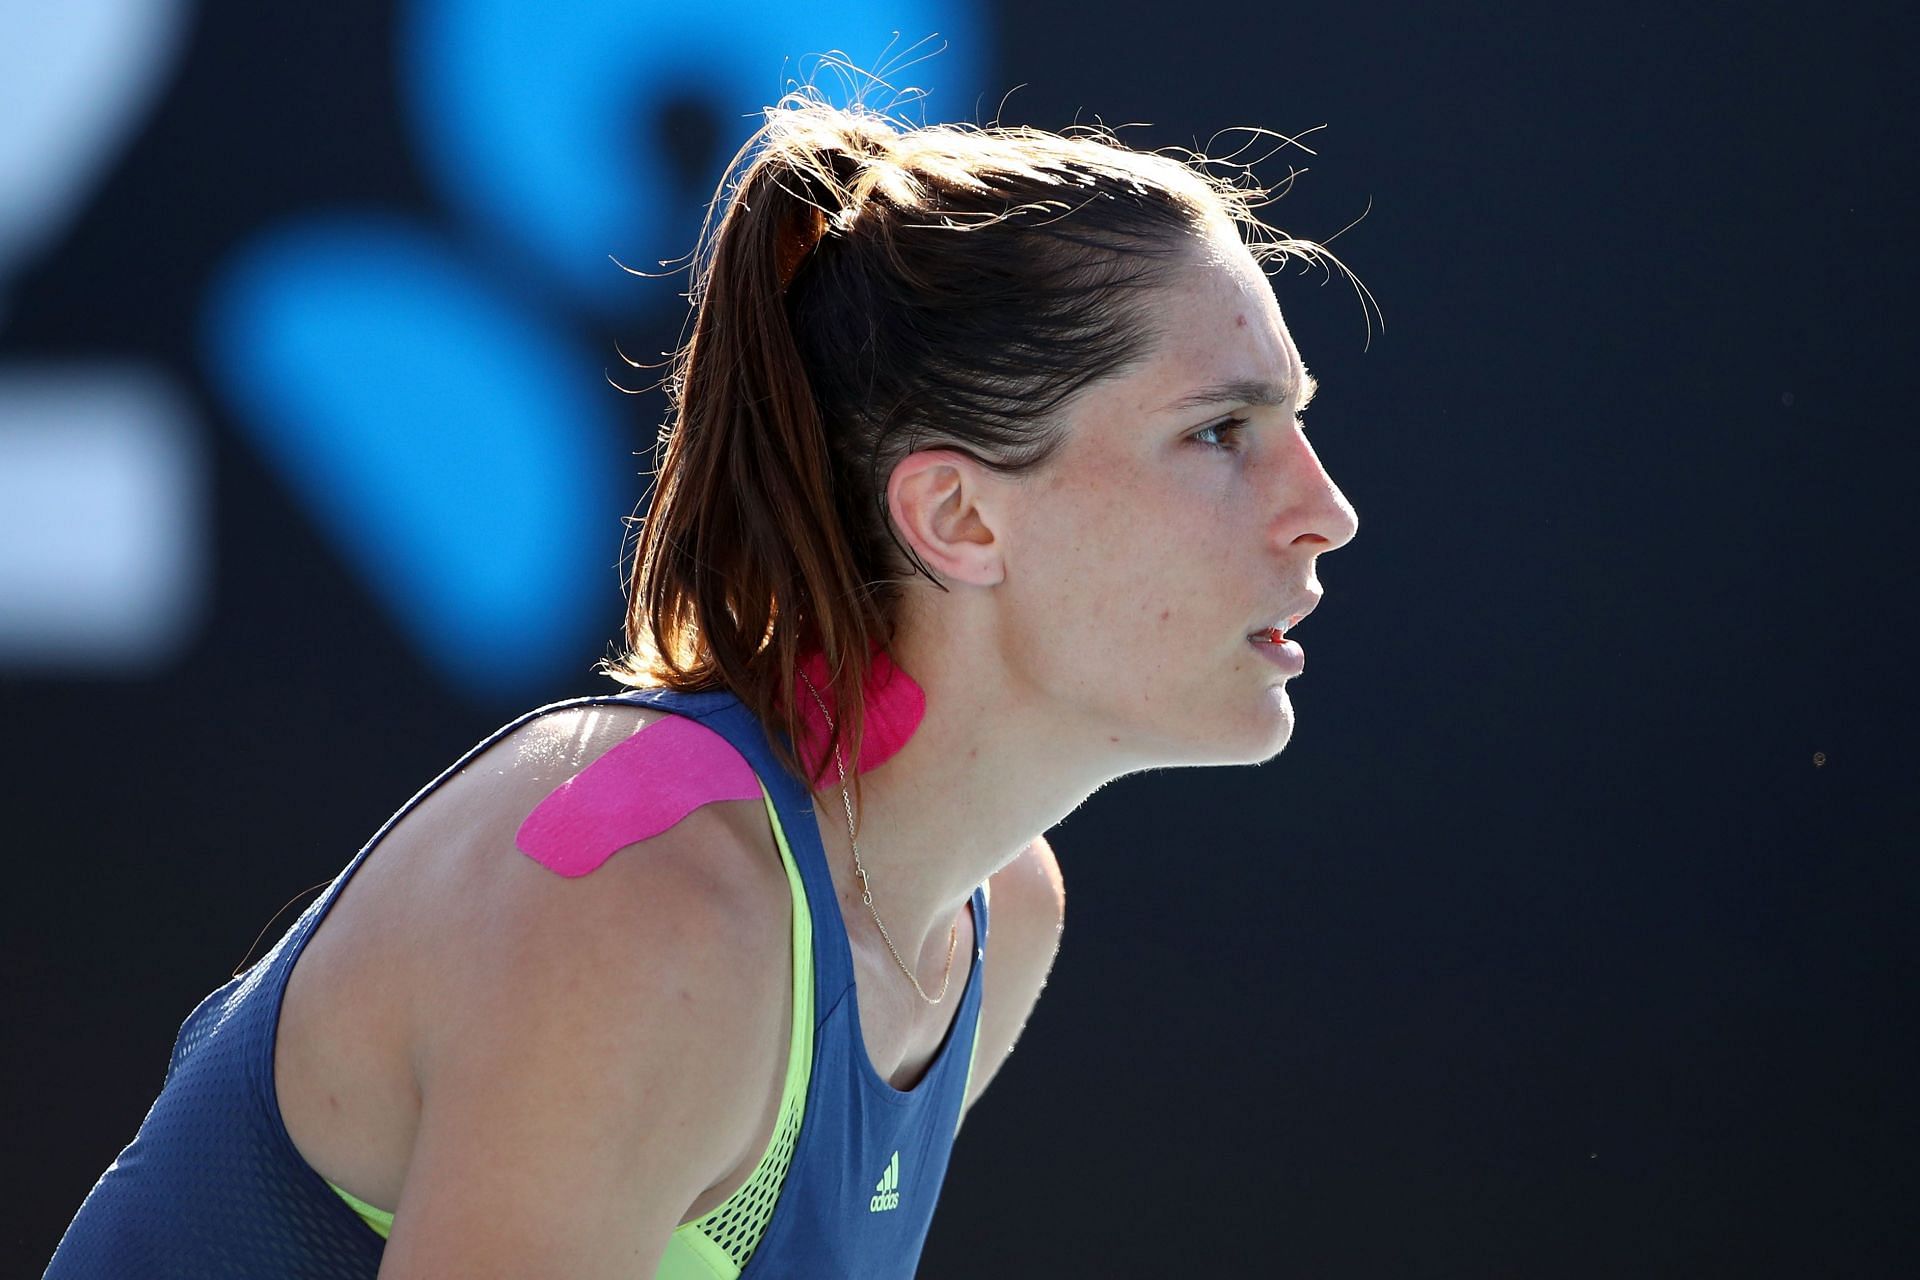 Andrea Petkovic is in the midst of a solid season.